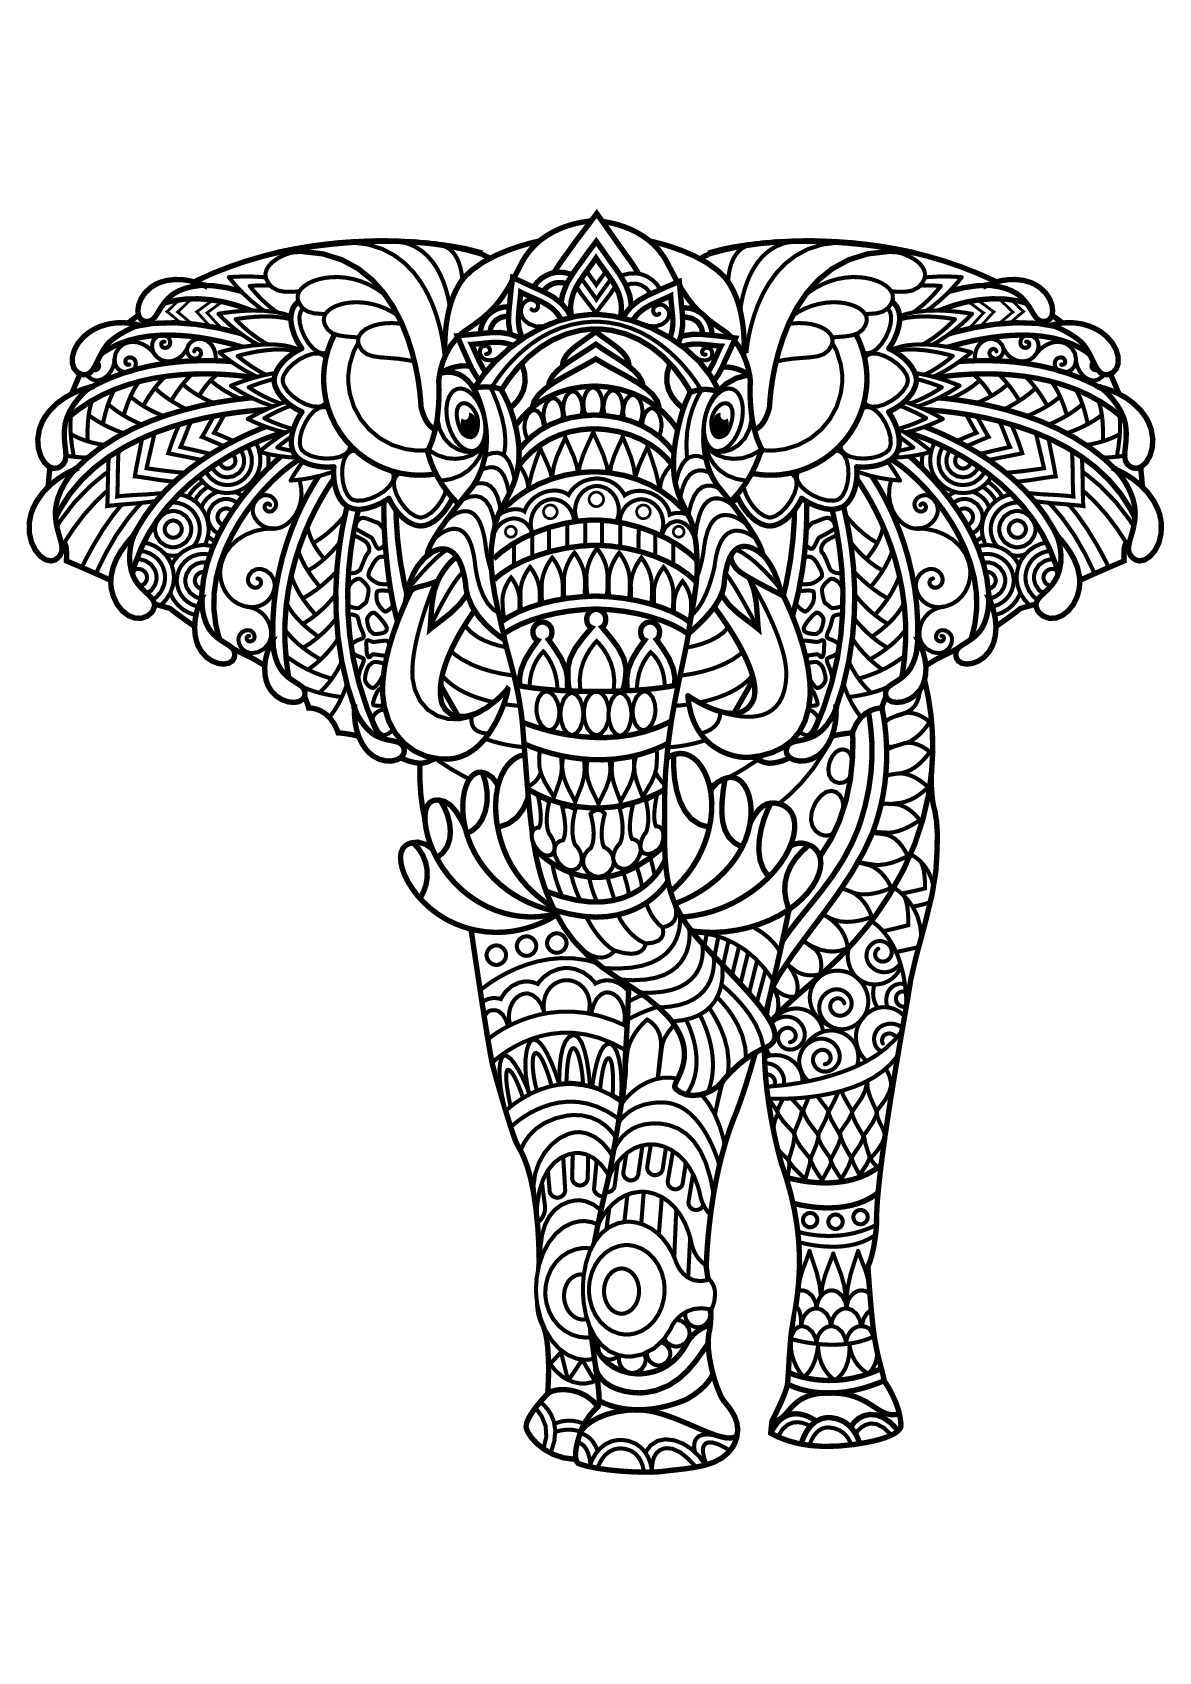 Elephant Adult Coloring Pages
 Free book elephant Elephants Adult Coloring Pages